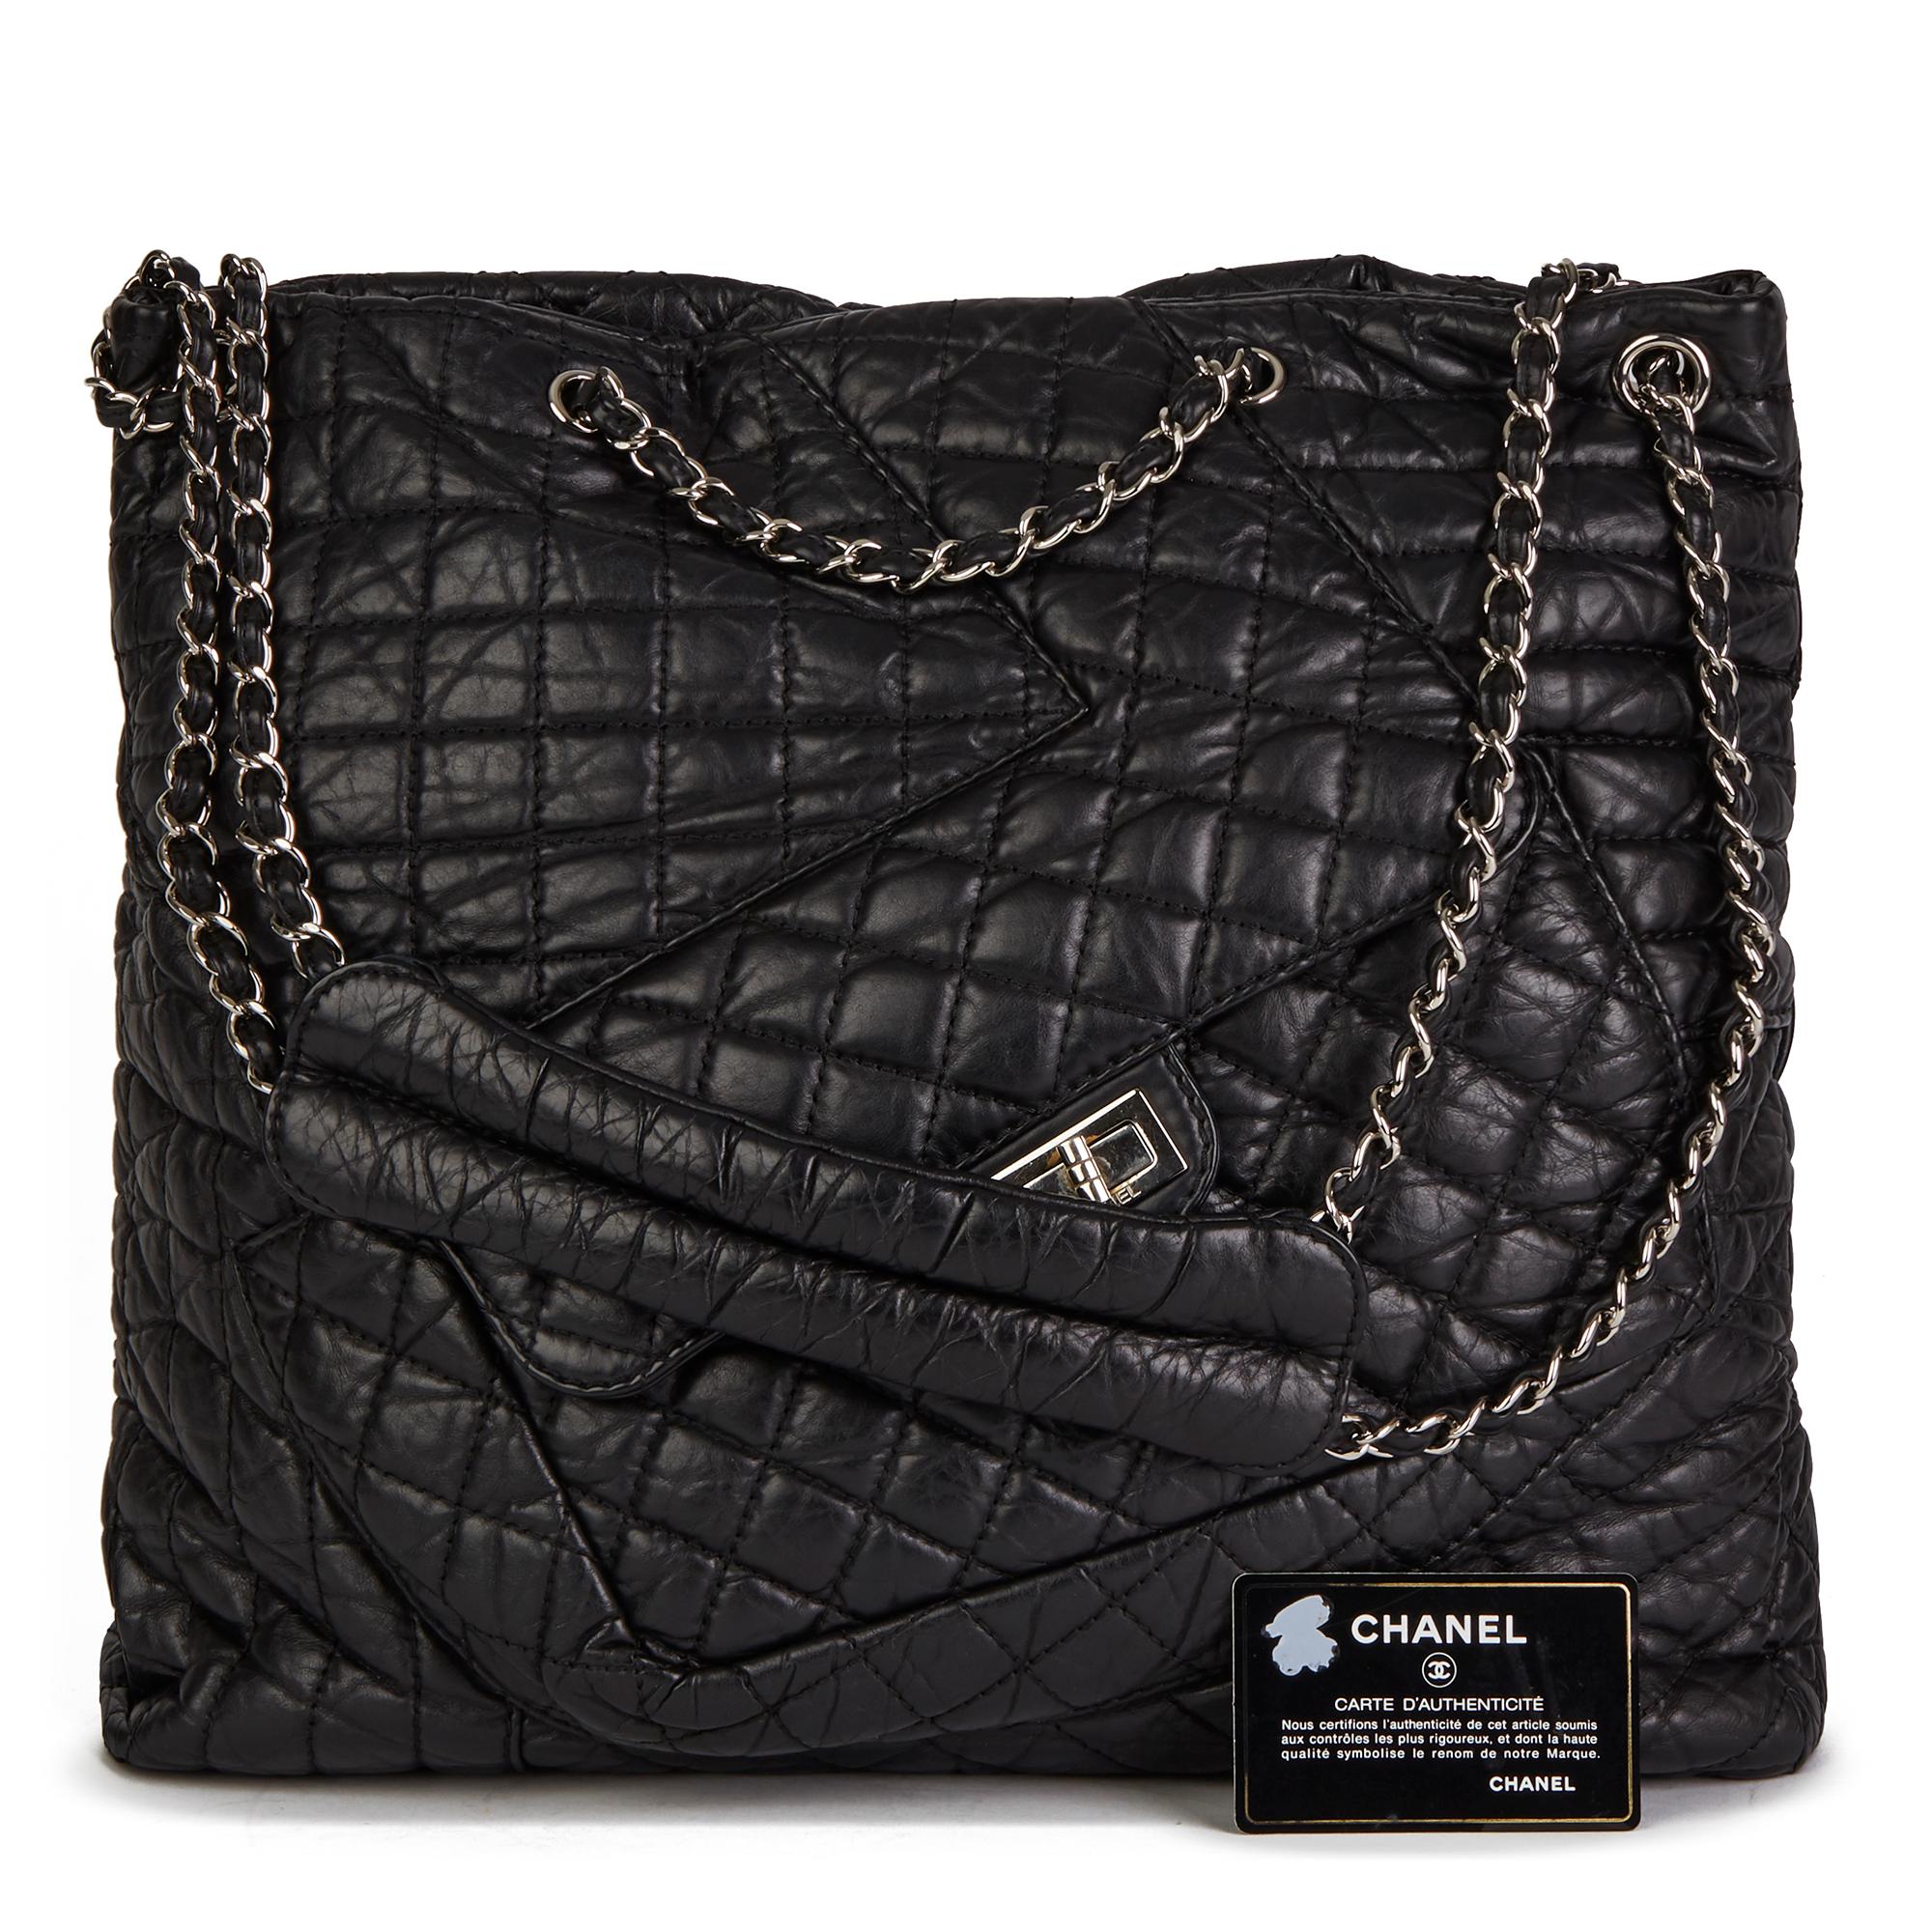 2010 Chanel Black Quilted Aged Calfskin Leather Fantasy Shopping Tote 8